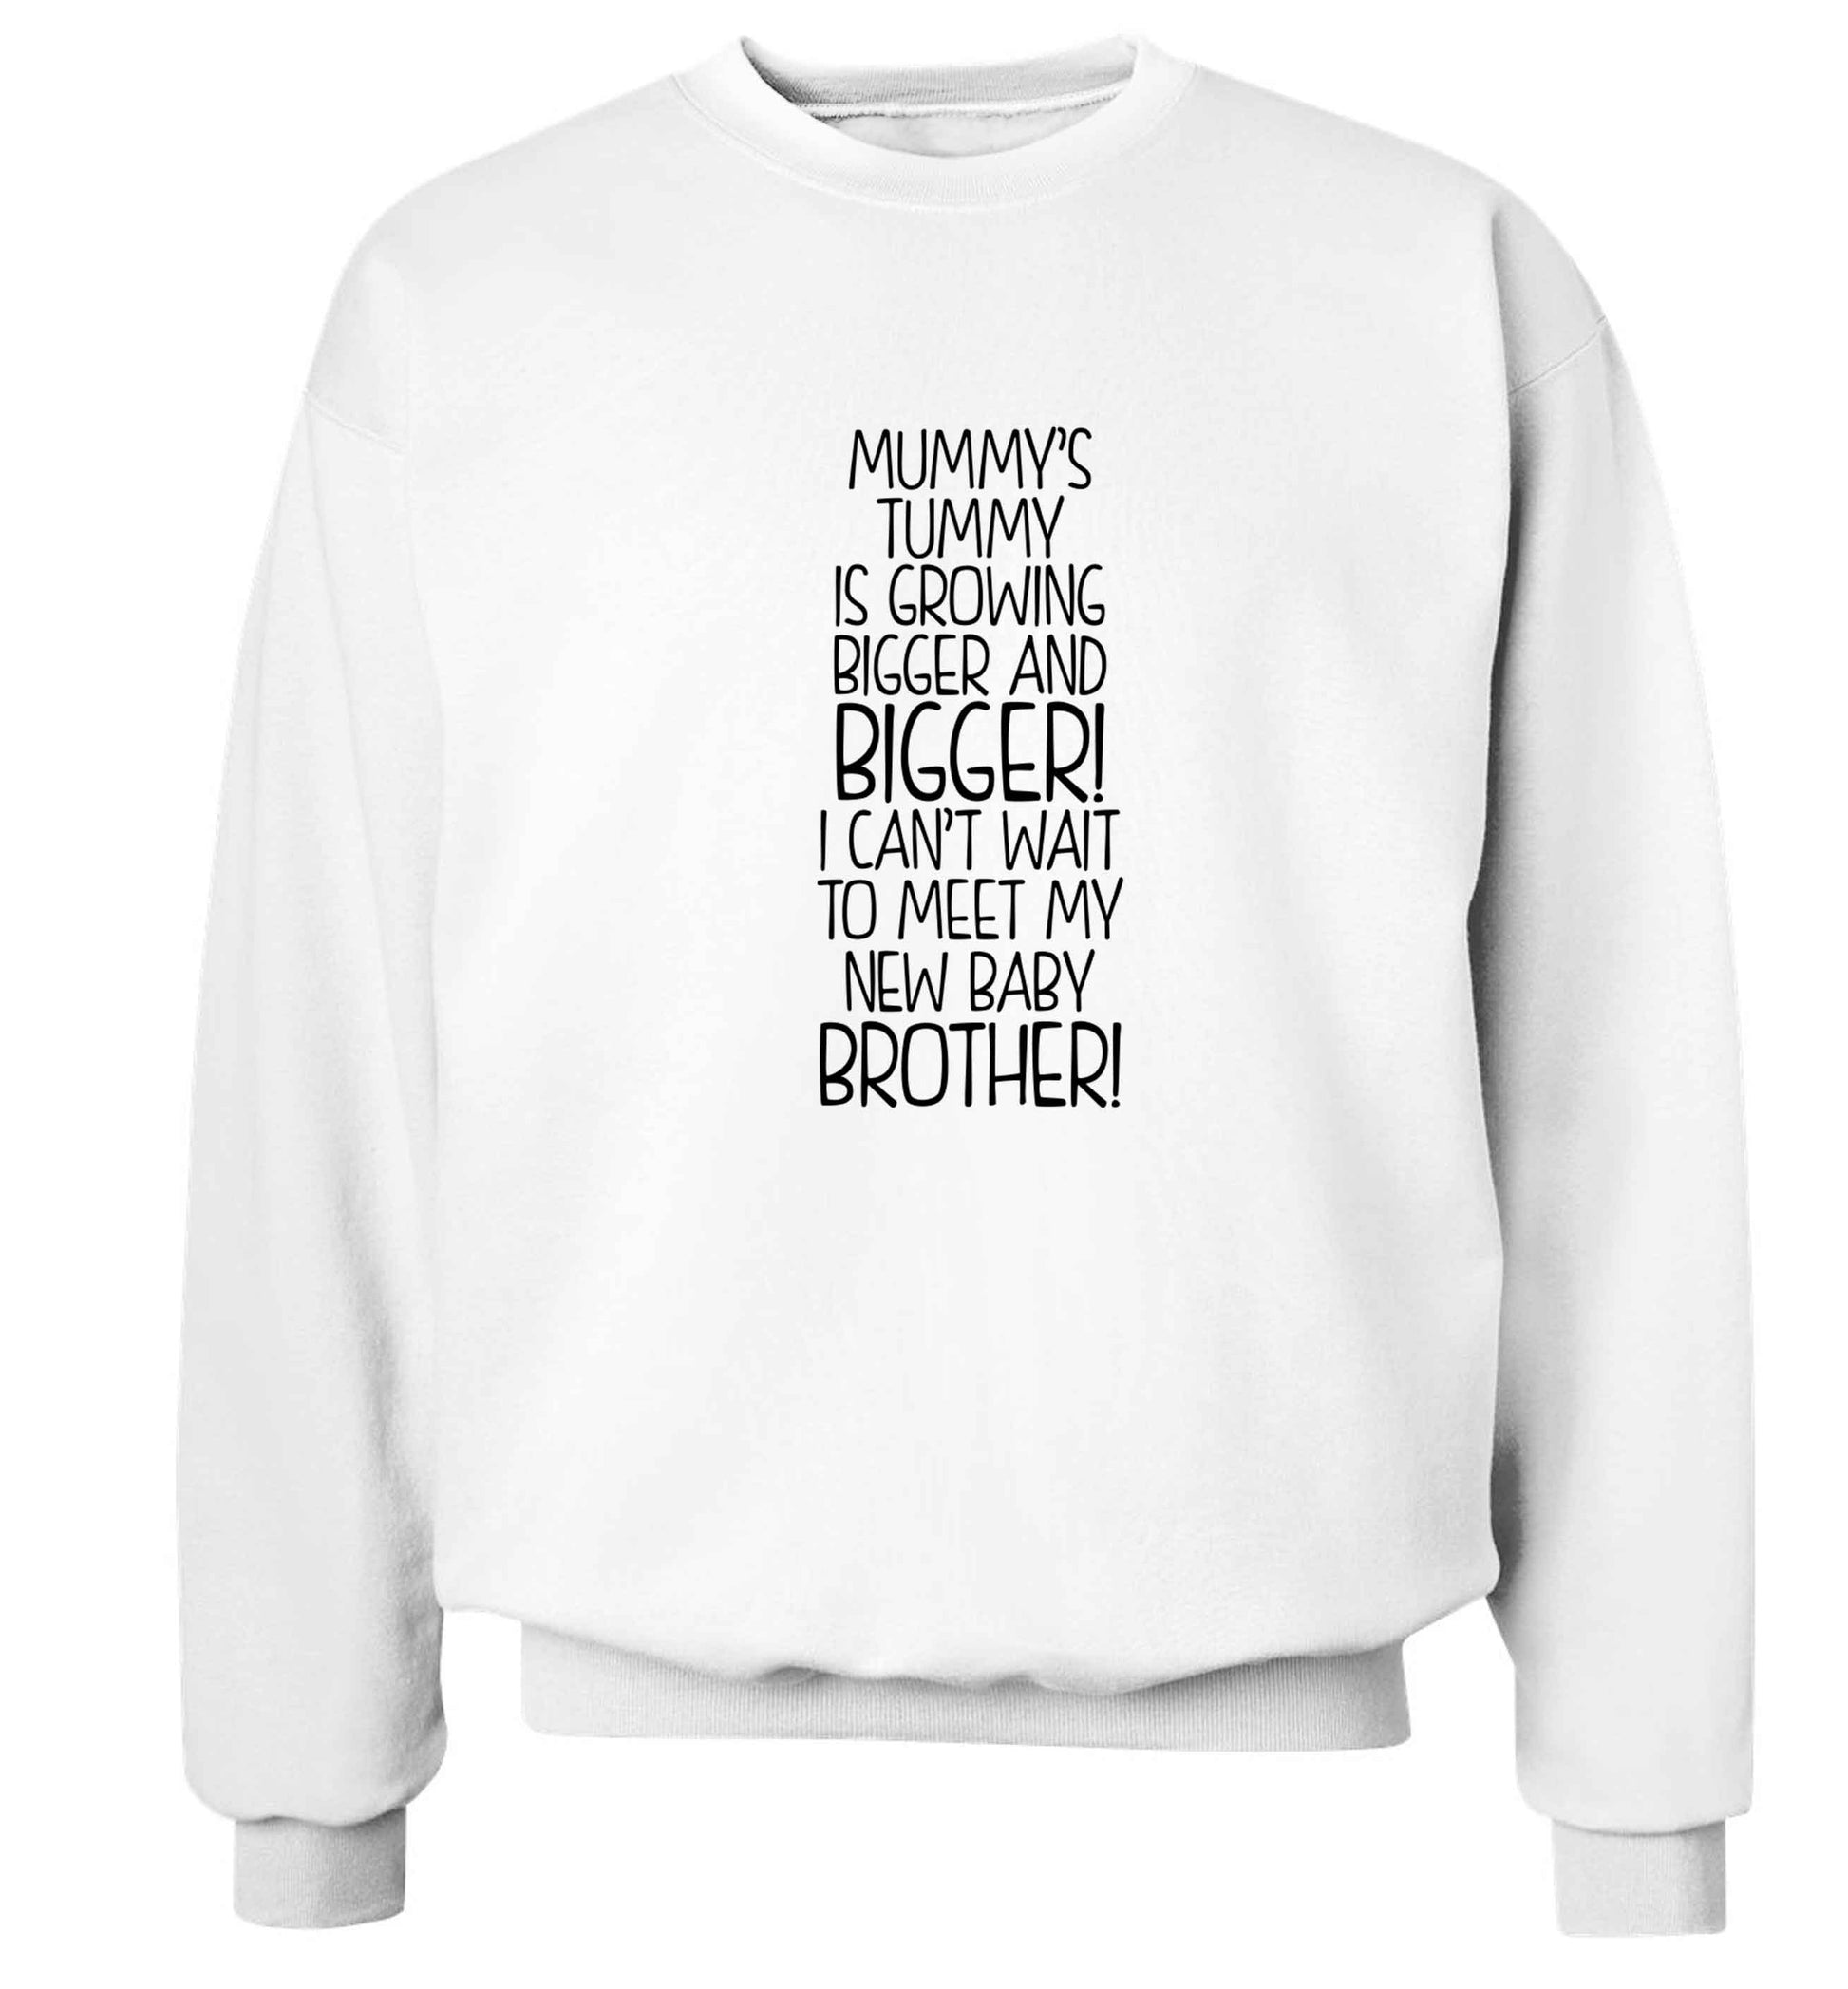 Mummy's tummy is growing bigger and bigger I can't wait to meet my new baby brother! Adult's unisex white Sweater 2XL